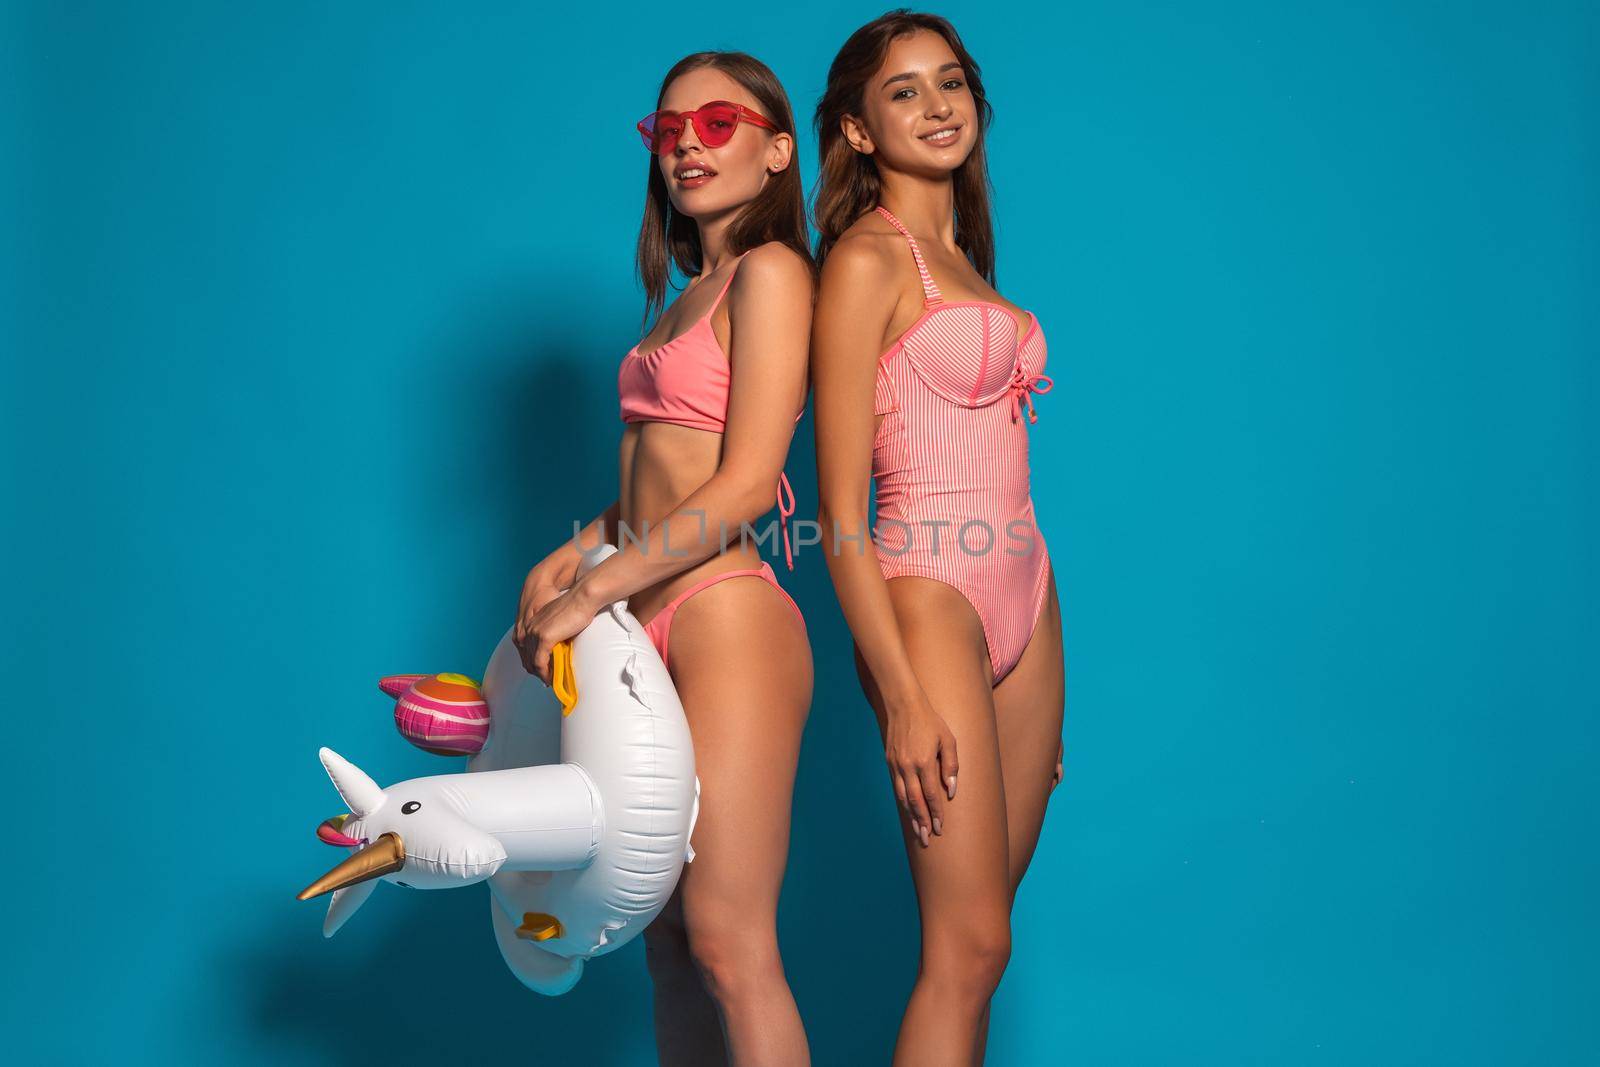 Two happy smiling girls in pink swimsuits standing back to back in studio on blue background, holding unicorn rubber ring. Concept of pool party or beach vacation